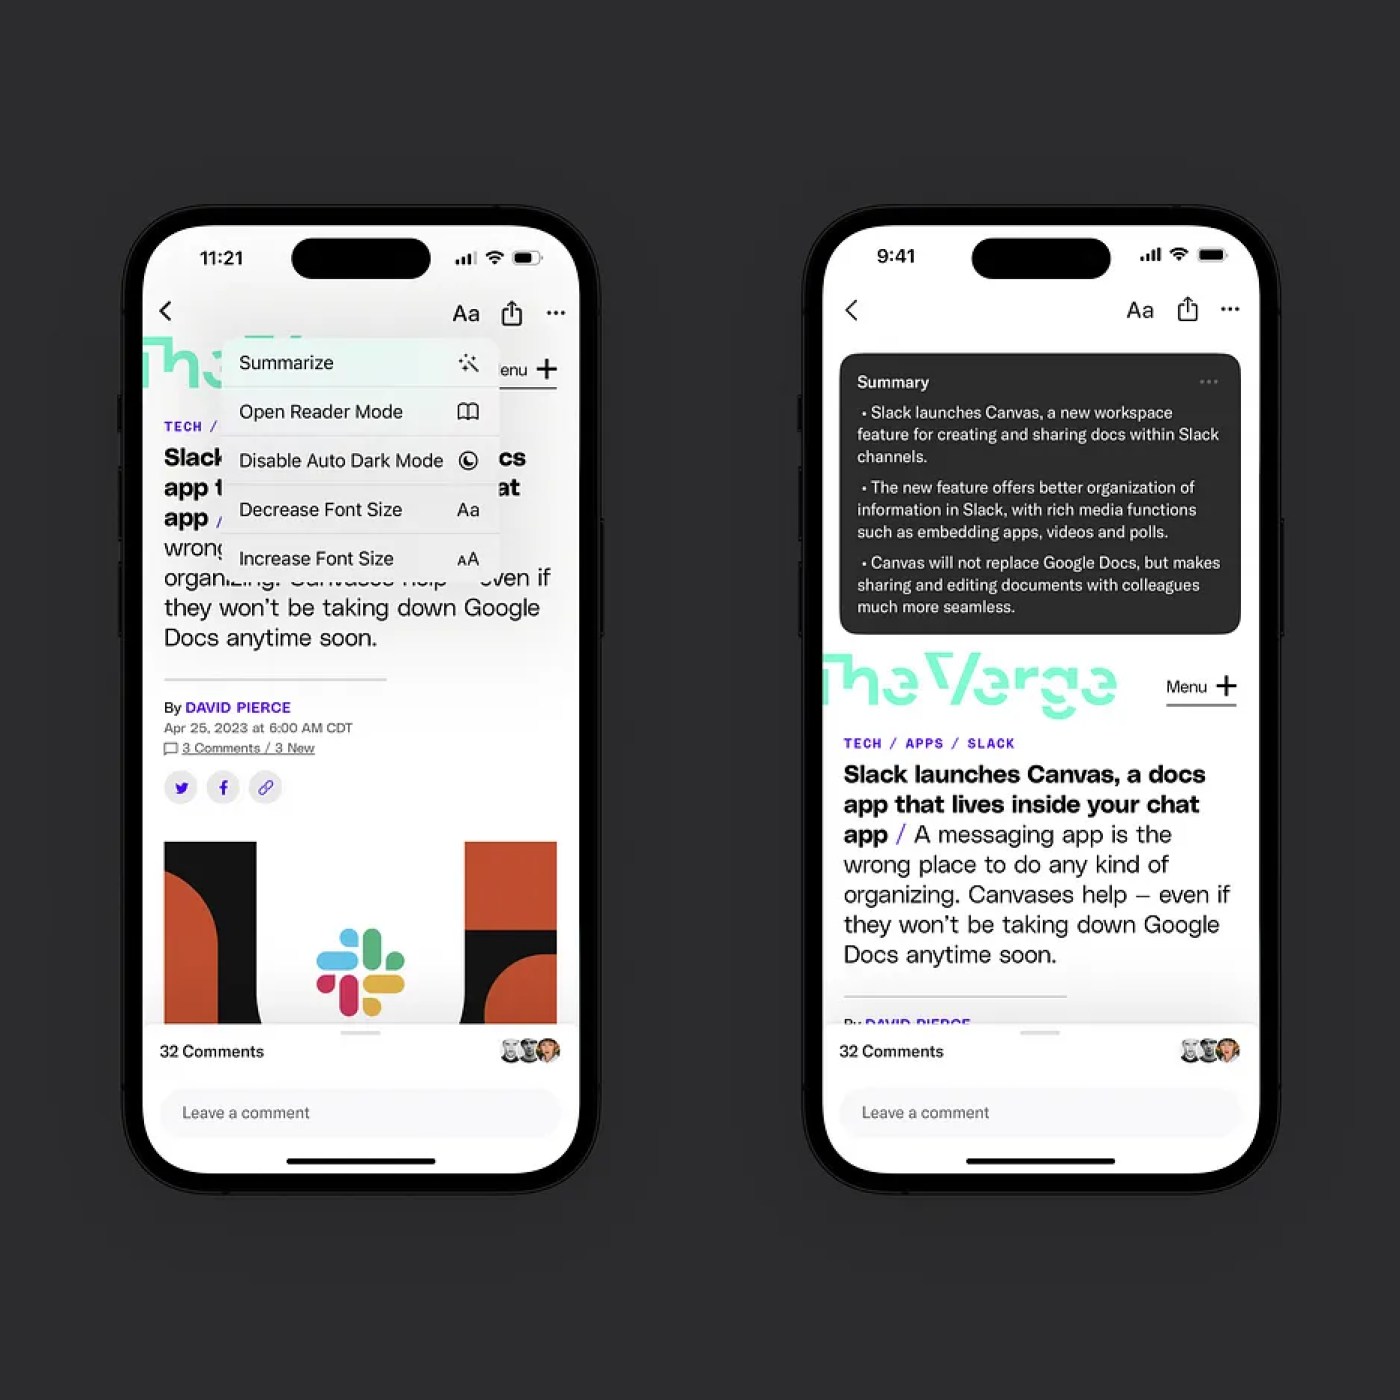 Google App for iOS Can Now Use AI to Summarize Articles - MacRumors